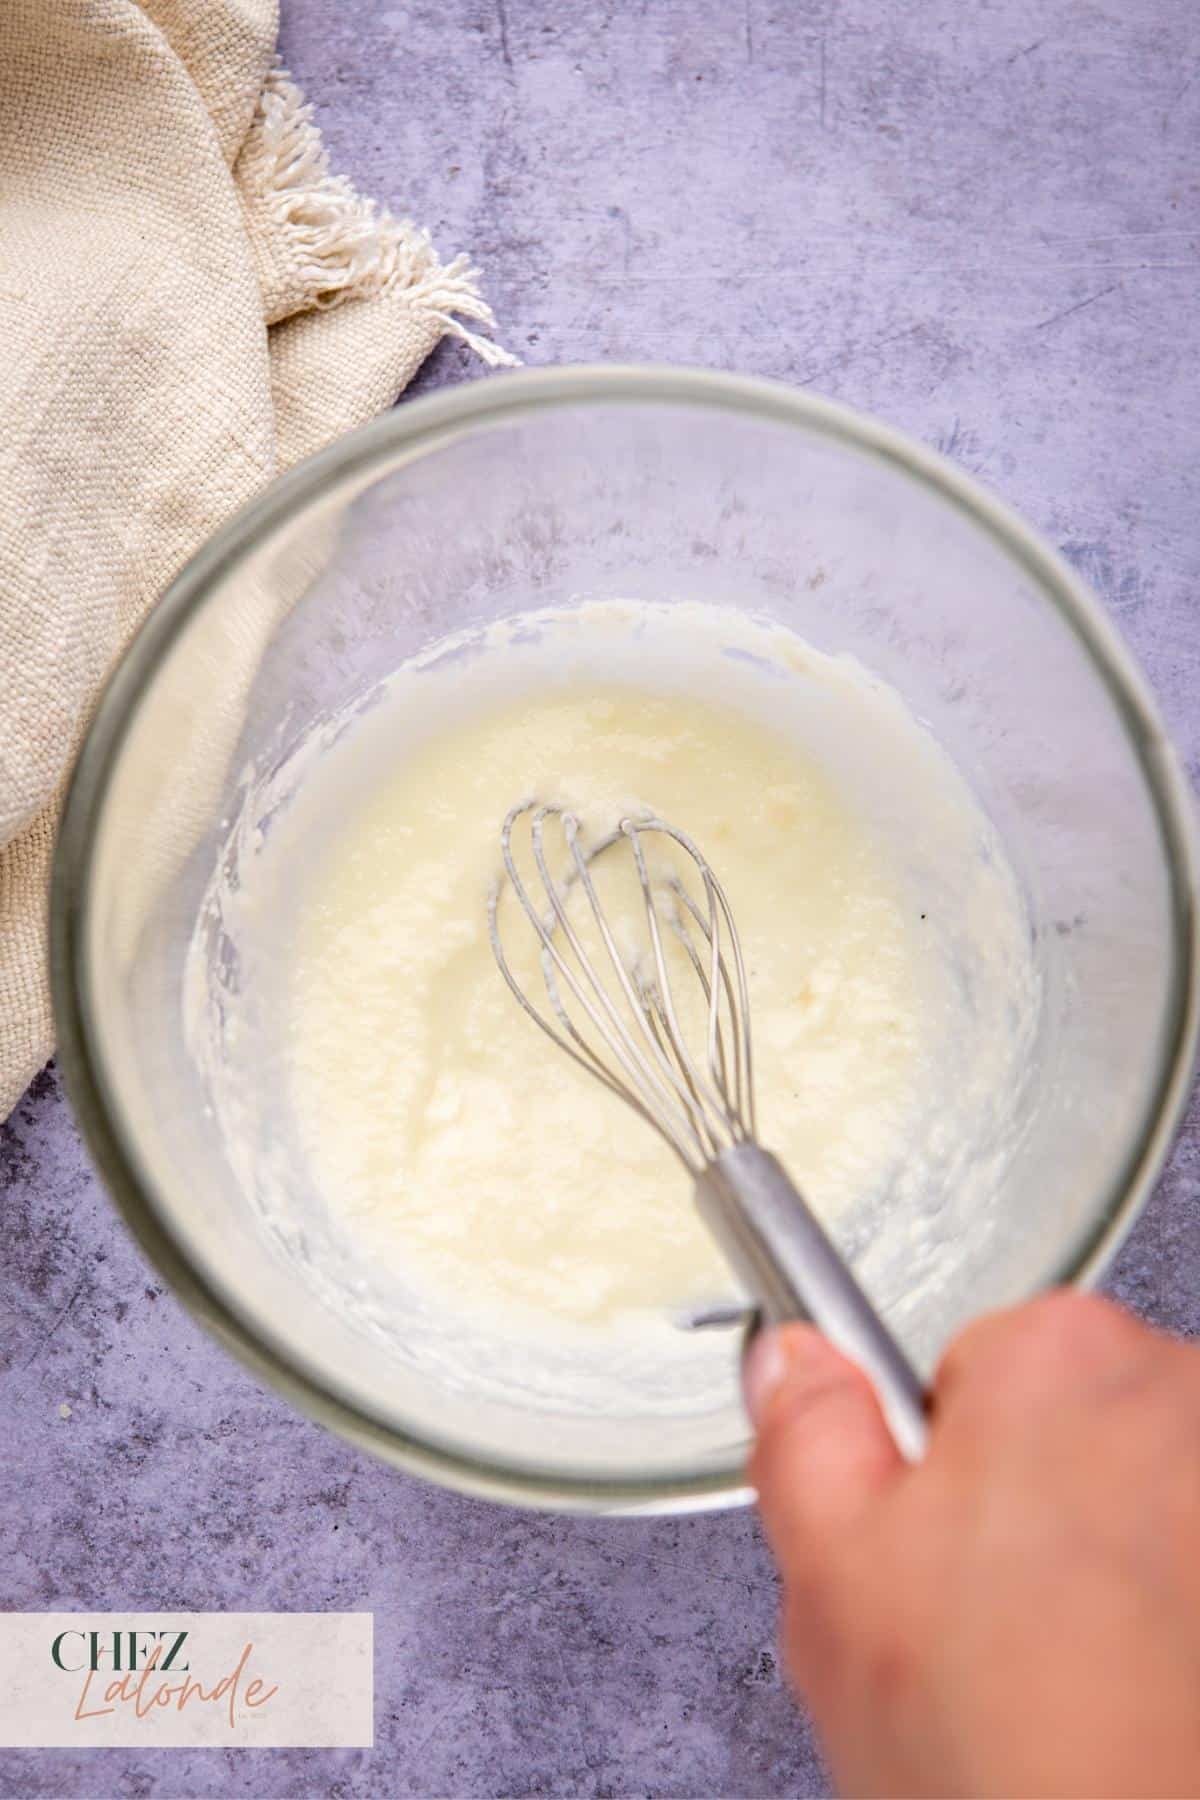 combine cheese and pasta water together for form a cream cheese paste.